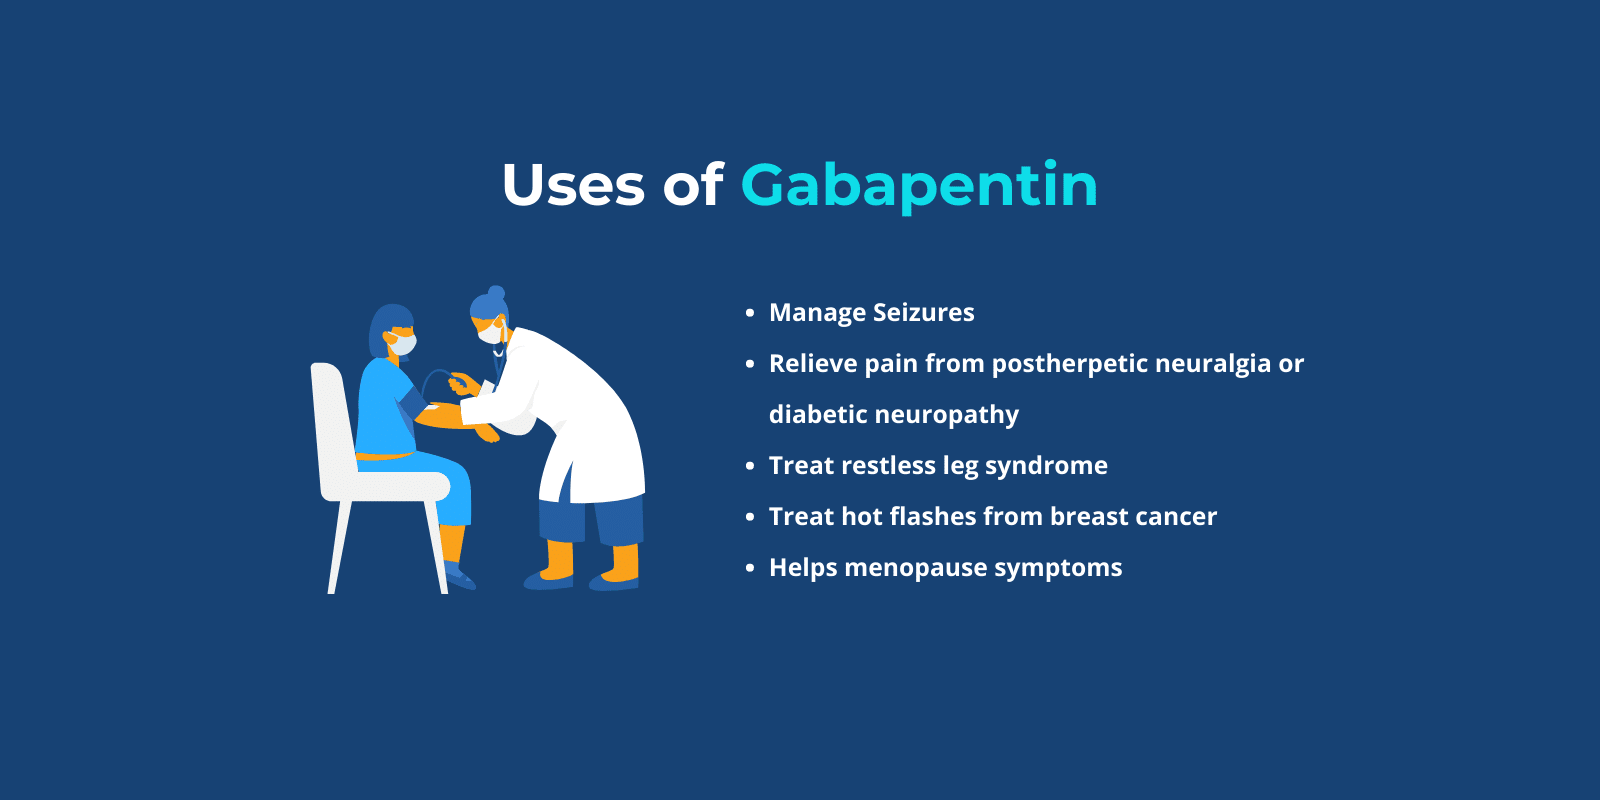 List of Gabapentin uses with an illustration of a doctor examining a patient